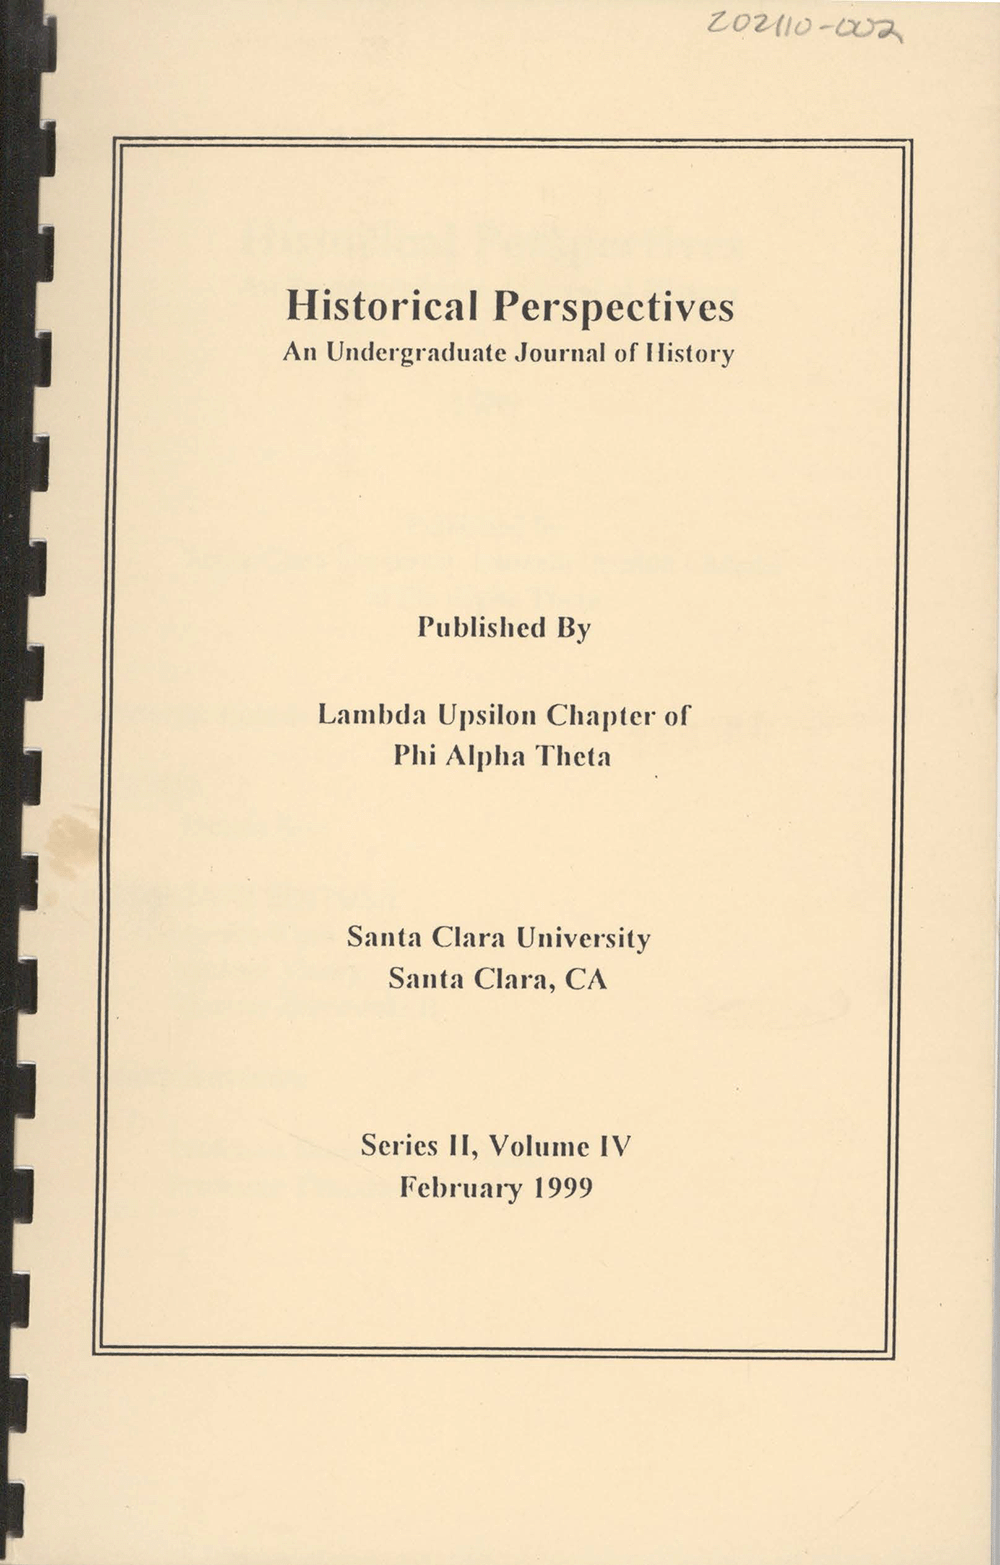 Historical Perspectives 1999, volume 4